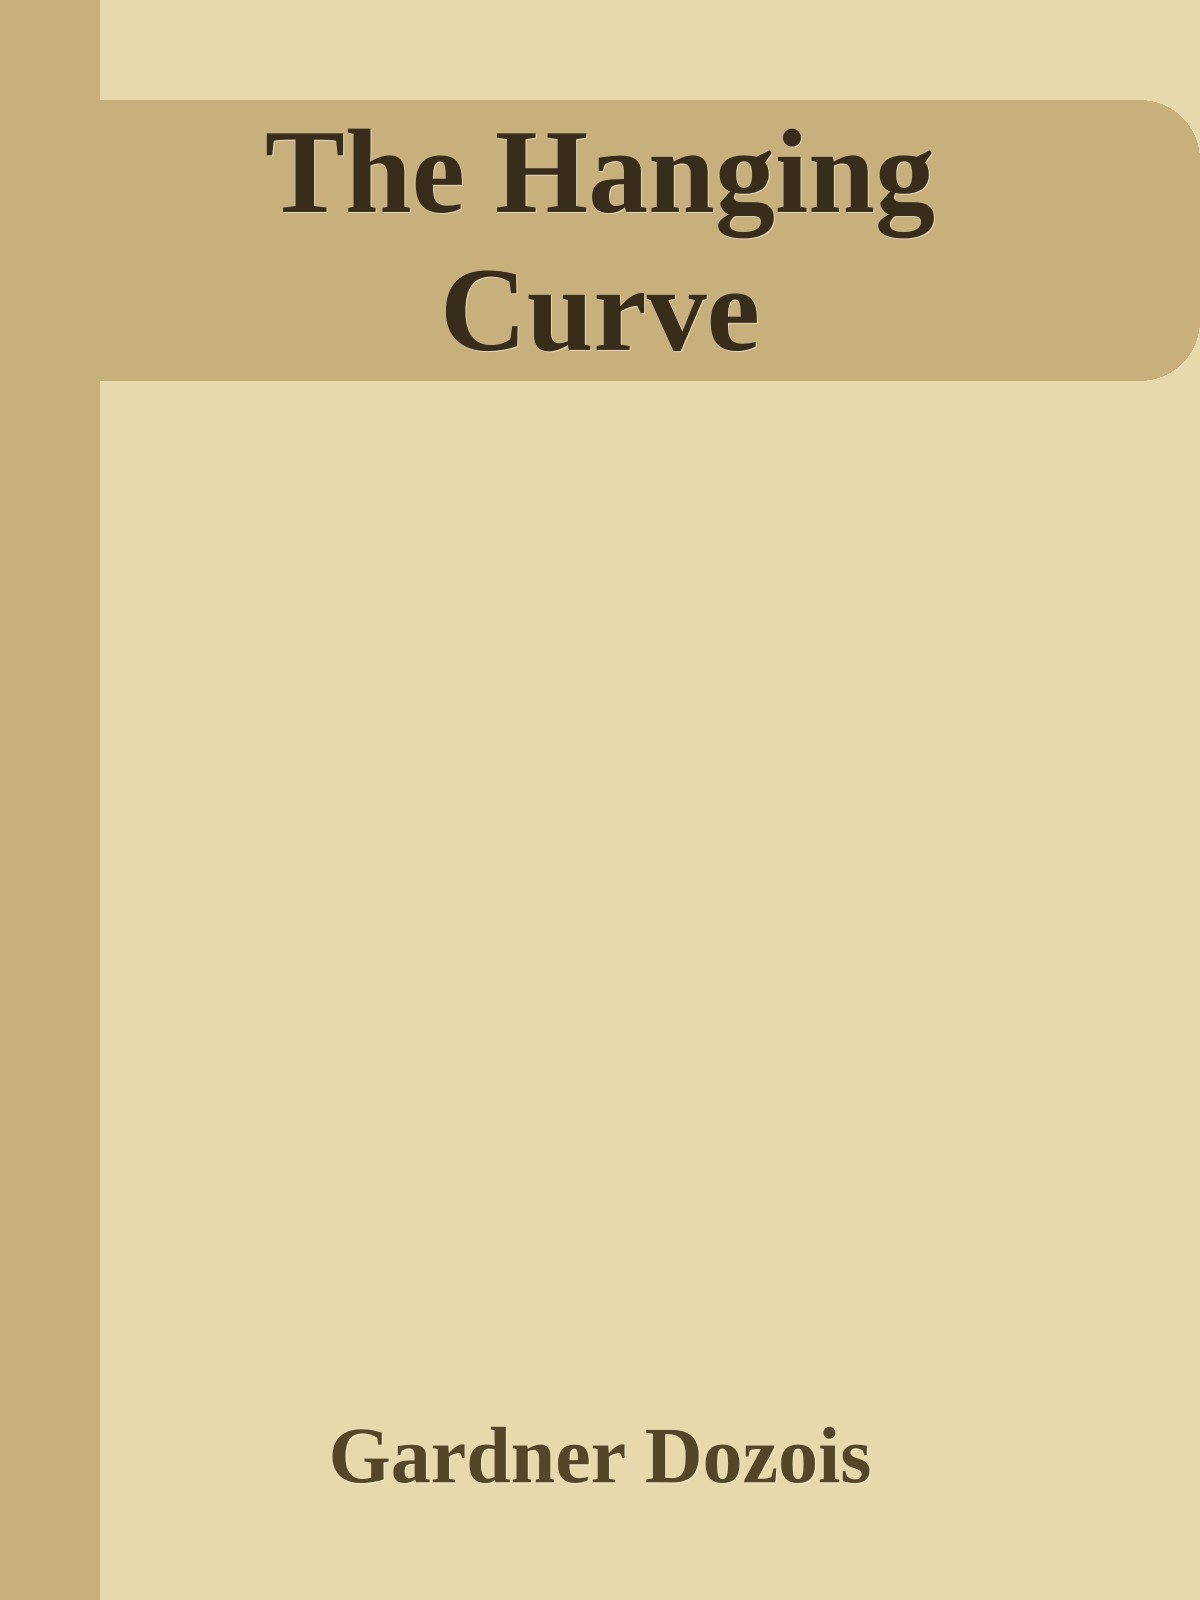 The Hanging Curve